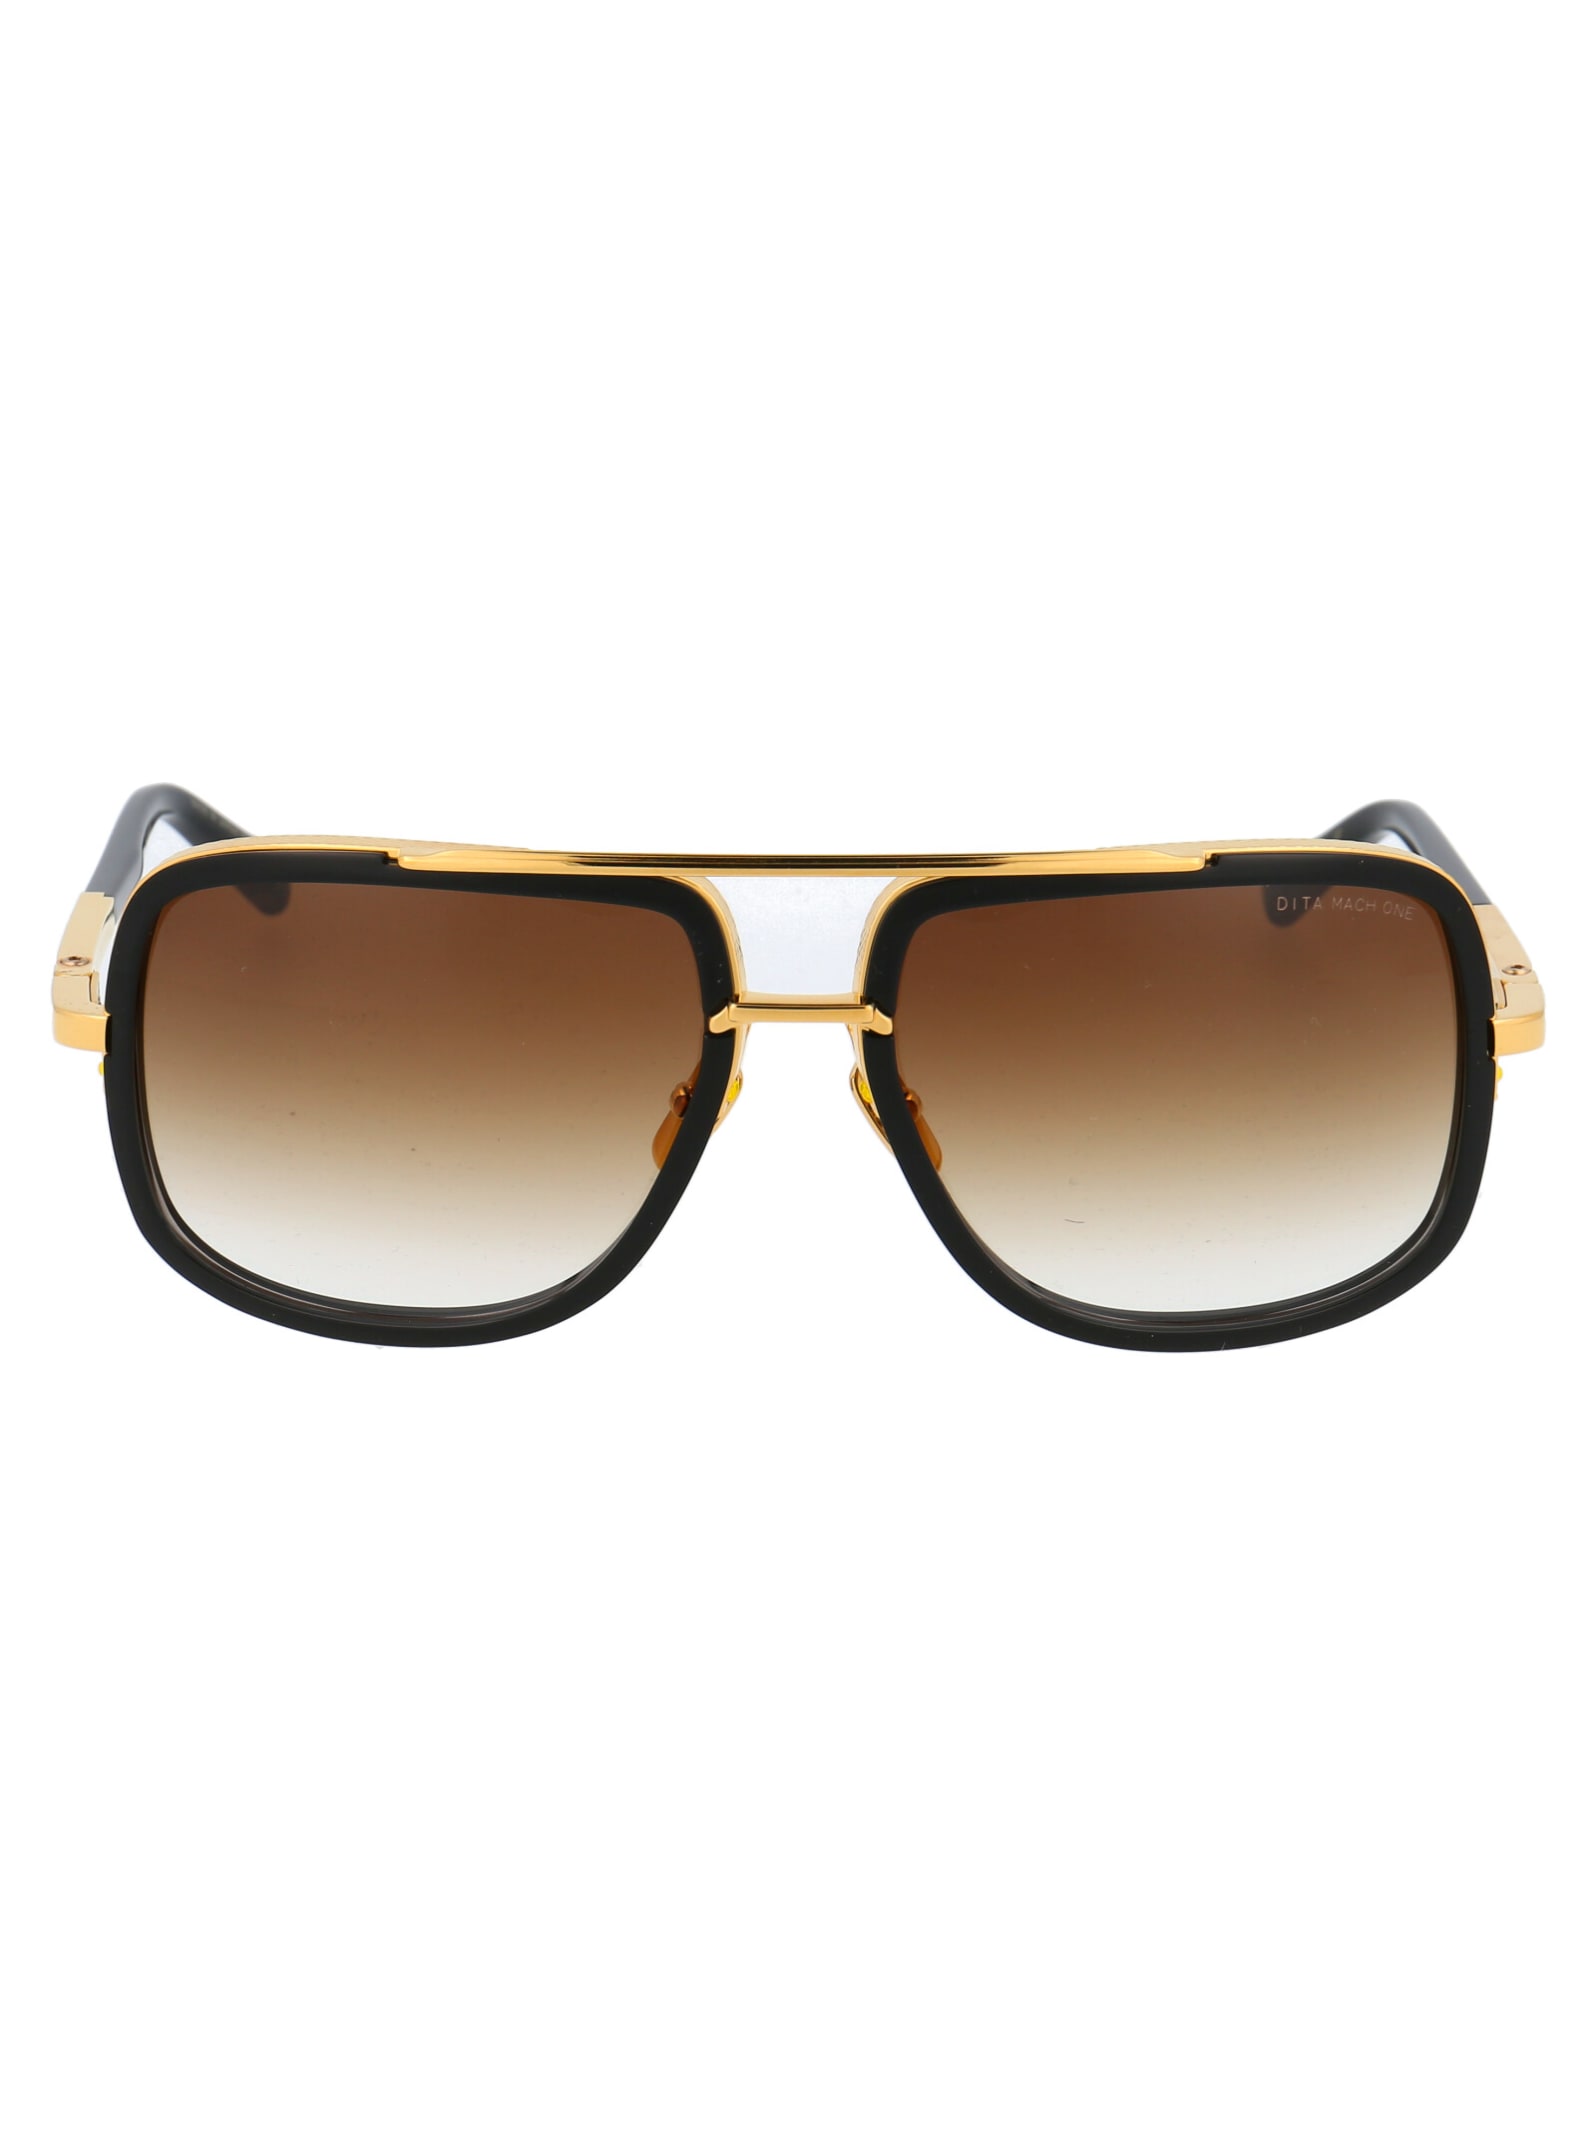 Dita Mach-one Sunglasses In Shiny 18k Gold - Black W/d.brown To Clear ...